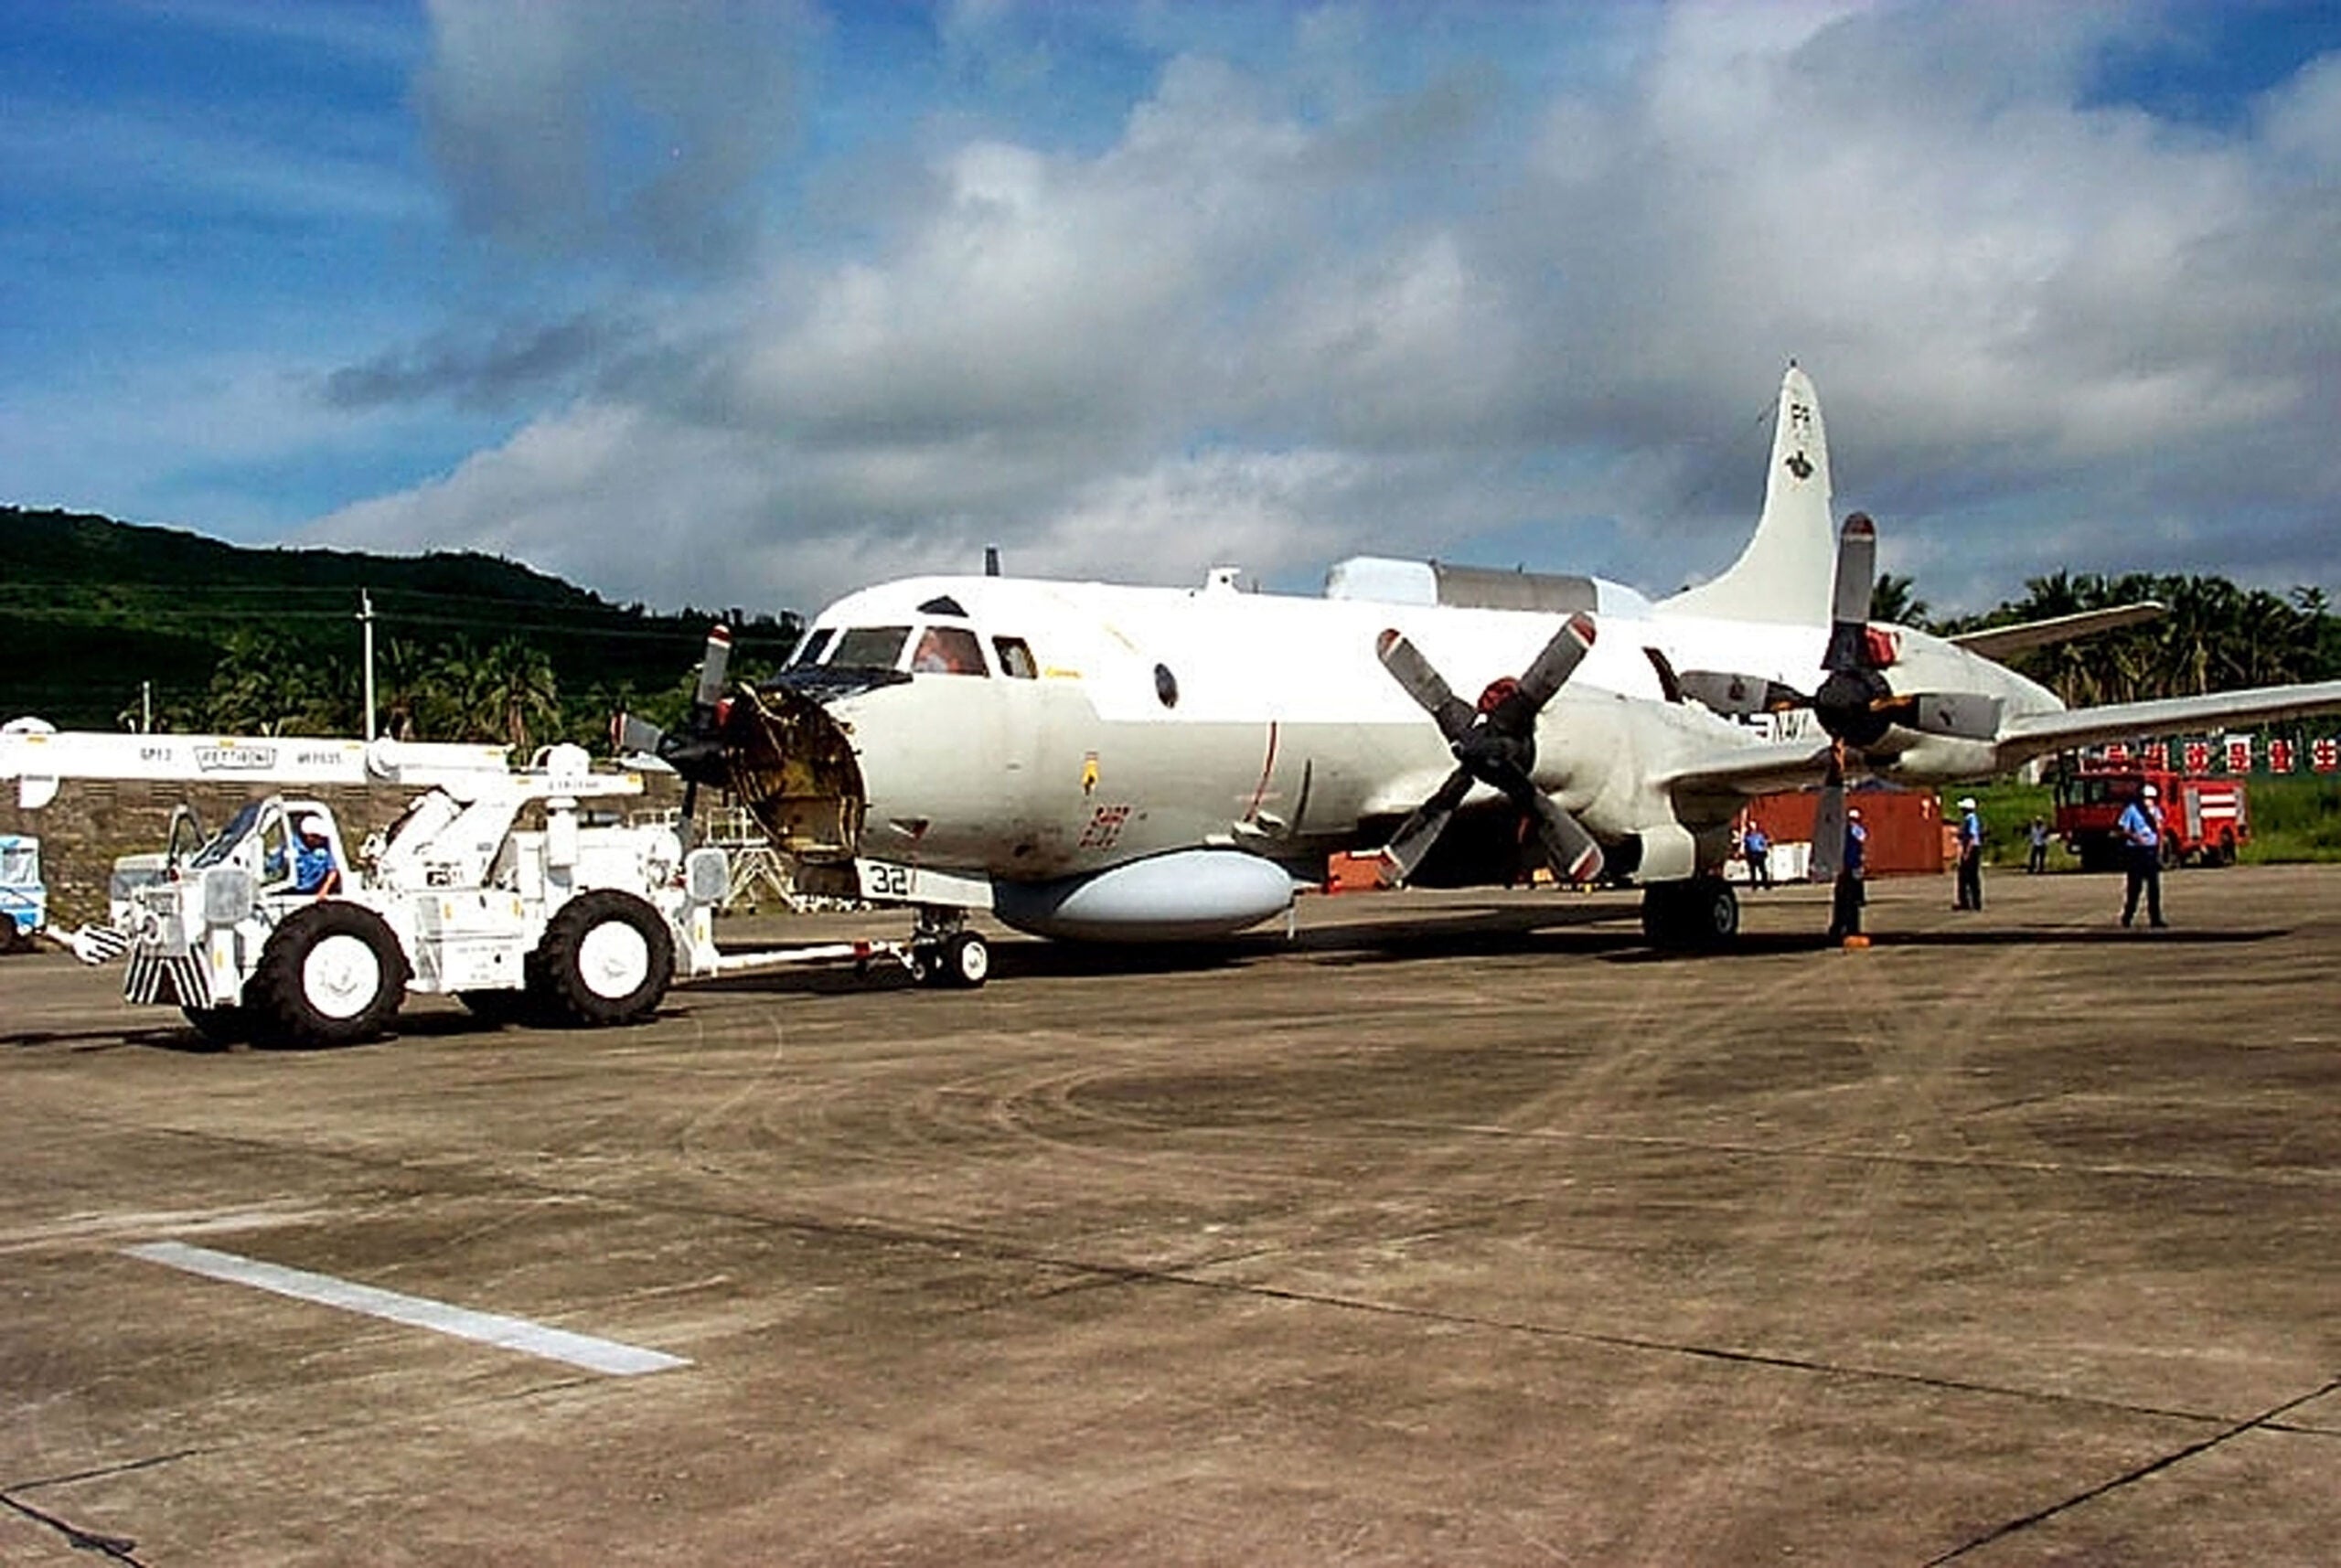 391072 01: A Lockheed Martin Aeronautics Co. recovery team member repositions the EP-3E "Aries II" aircraft at Lingshui Airfield June 18, 2001 in Hainan, China. The Fleet Reconnaissance Squadron One (VQ-1) aircraft was involved in a mid-air collision with a Chinese F-8 fighter/interceptor April 1, 2001 and made an emergency landing on Hainan Island, where it has remained until disassembly and removal operations began by Lockheed Martin personnel on June 13. The aircraft will be disassembled and returned to the United States. (Photos Courtesy of Lockheed Martin Aeronautics Co./US Navy via Getty Images)